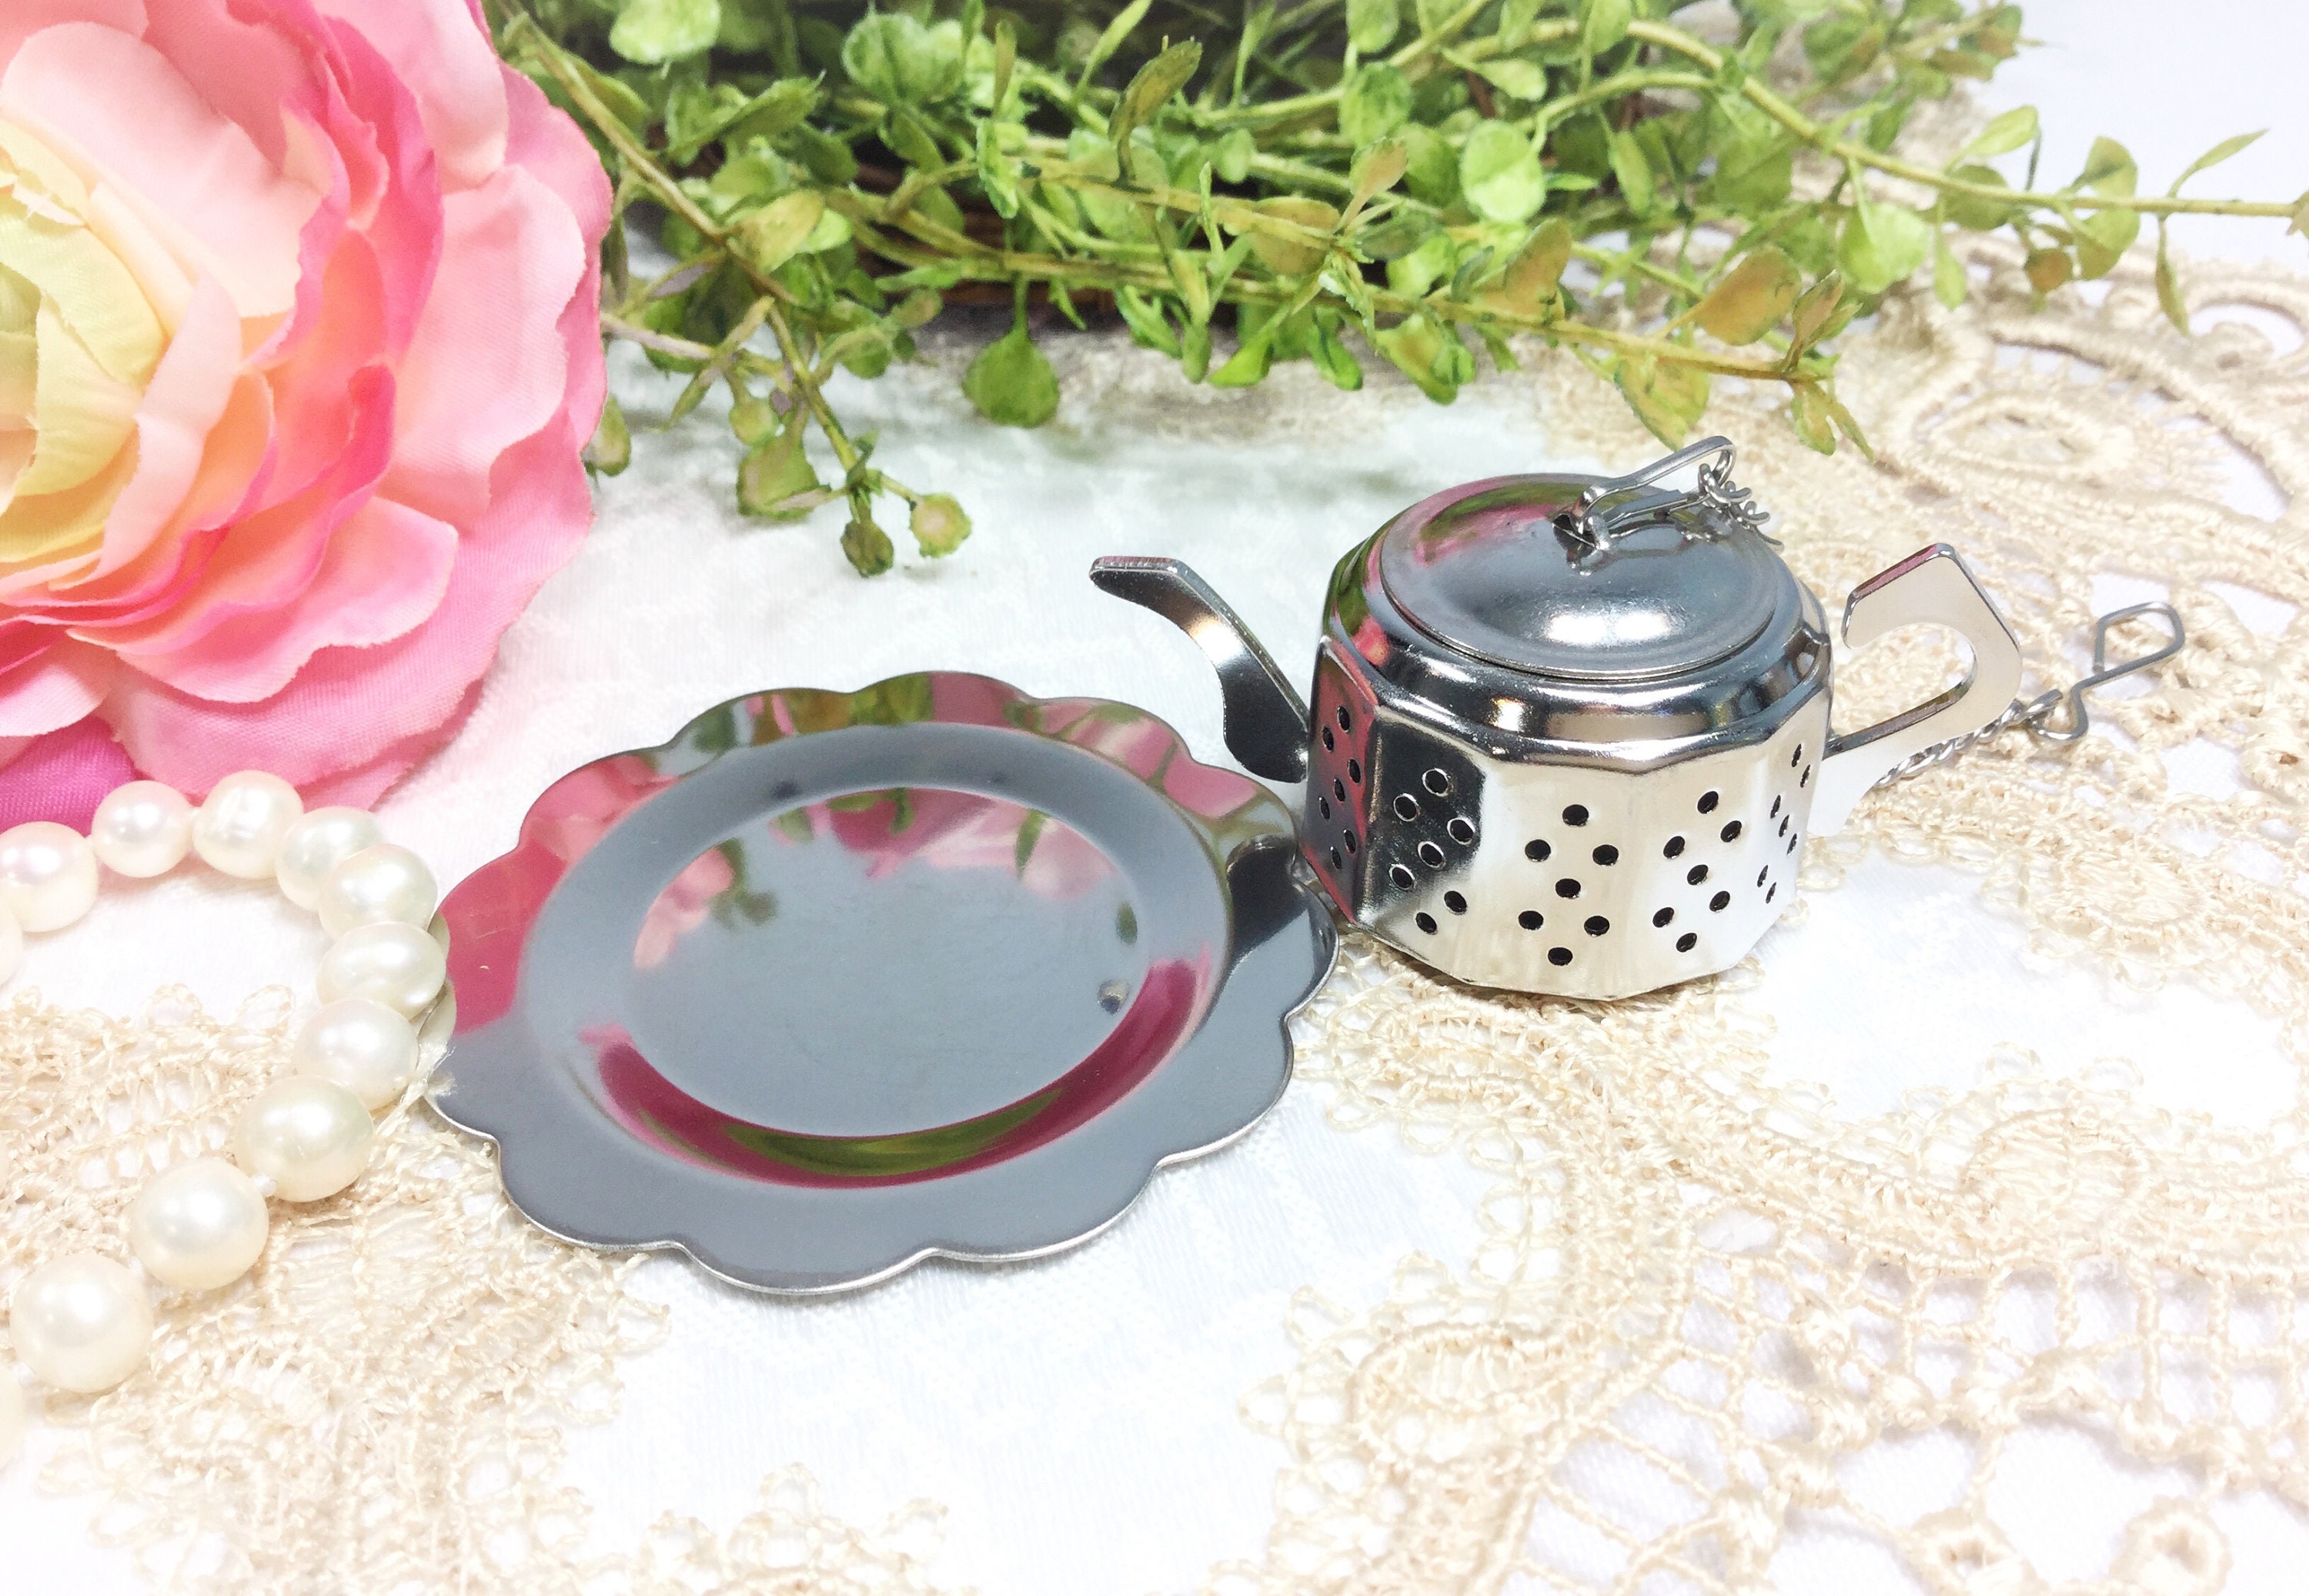 Adorable Stainless Steel Tea Pot Tea Infuser Steeper Herb Diffuser